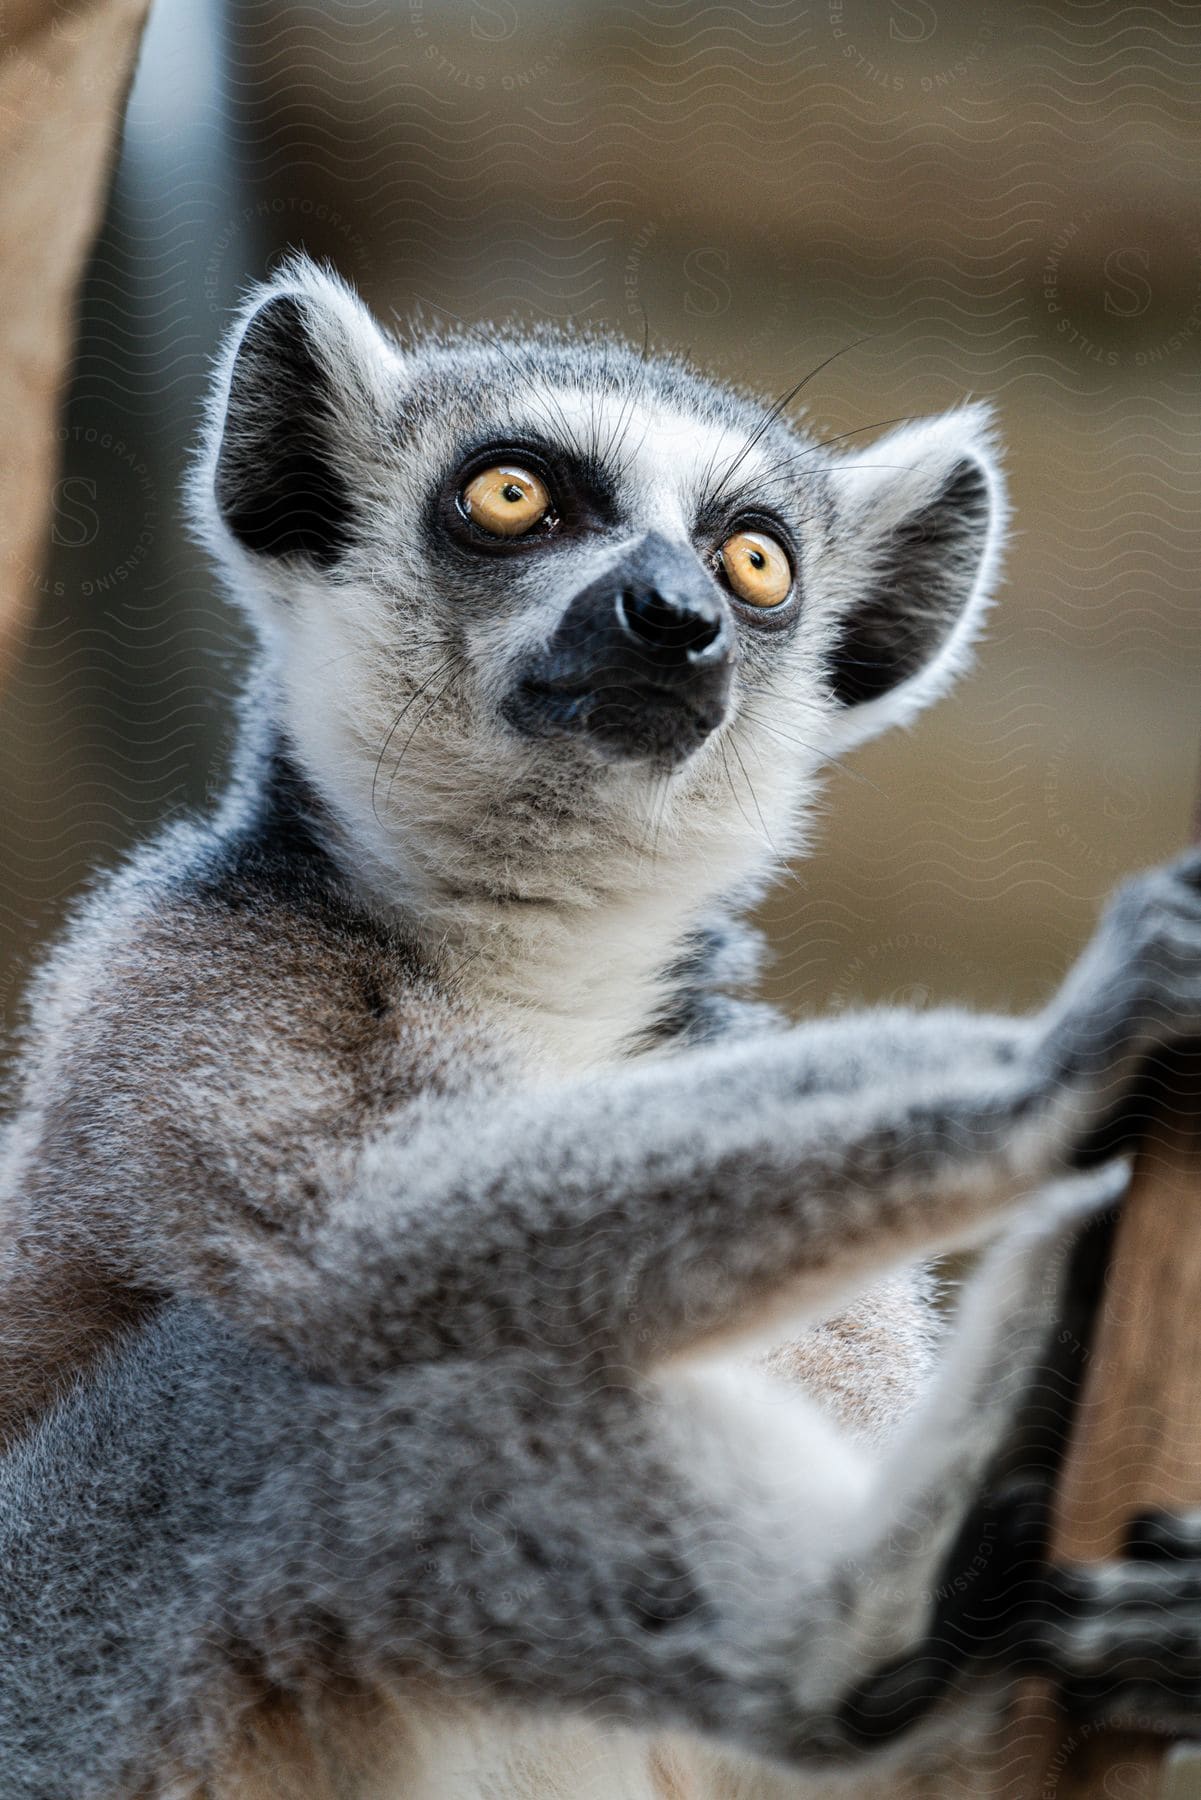 Lemur with yellow eyes and gray fur clinging to a branch with a blurred background.